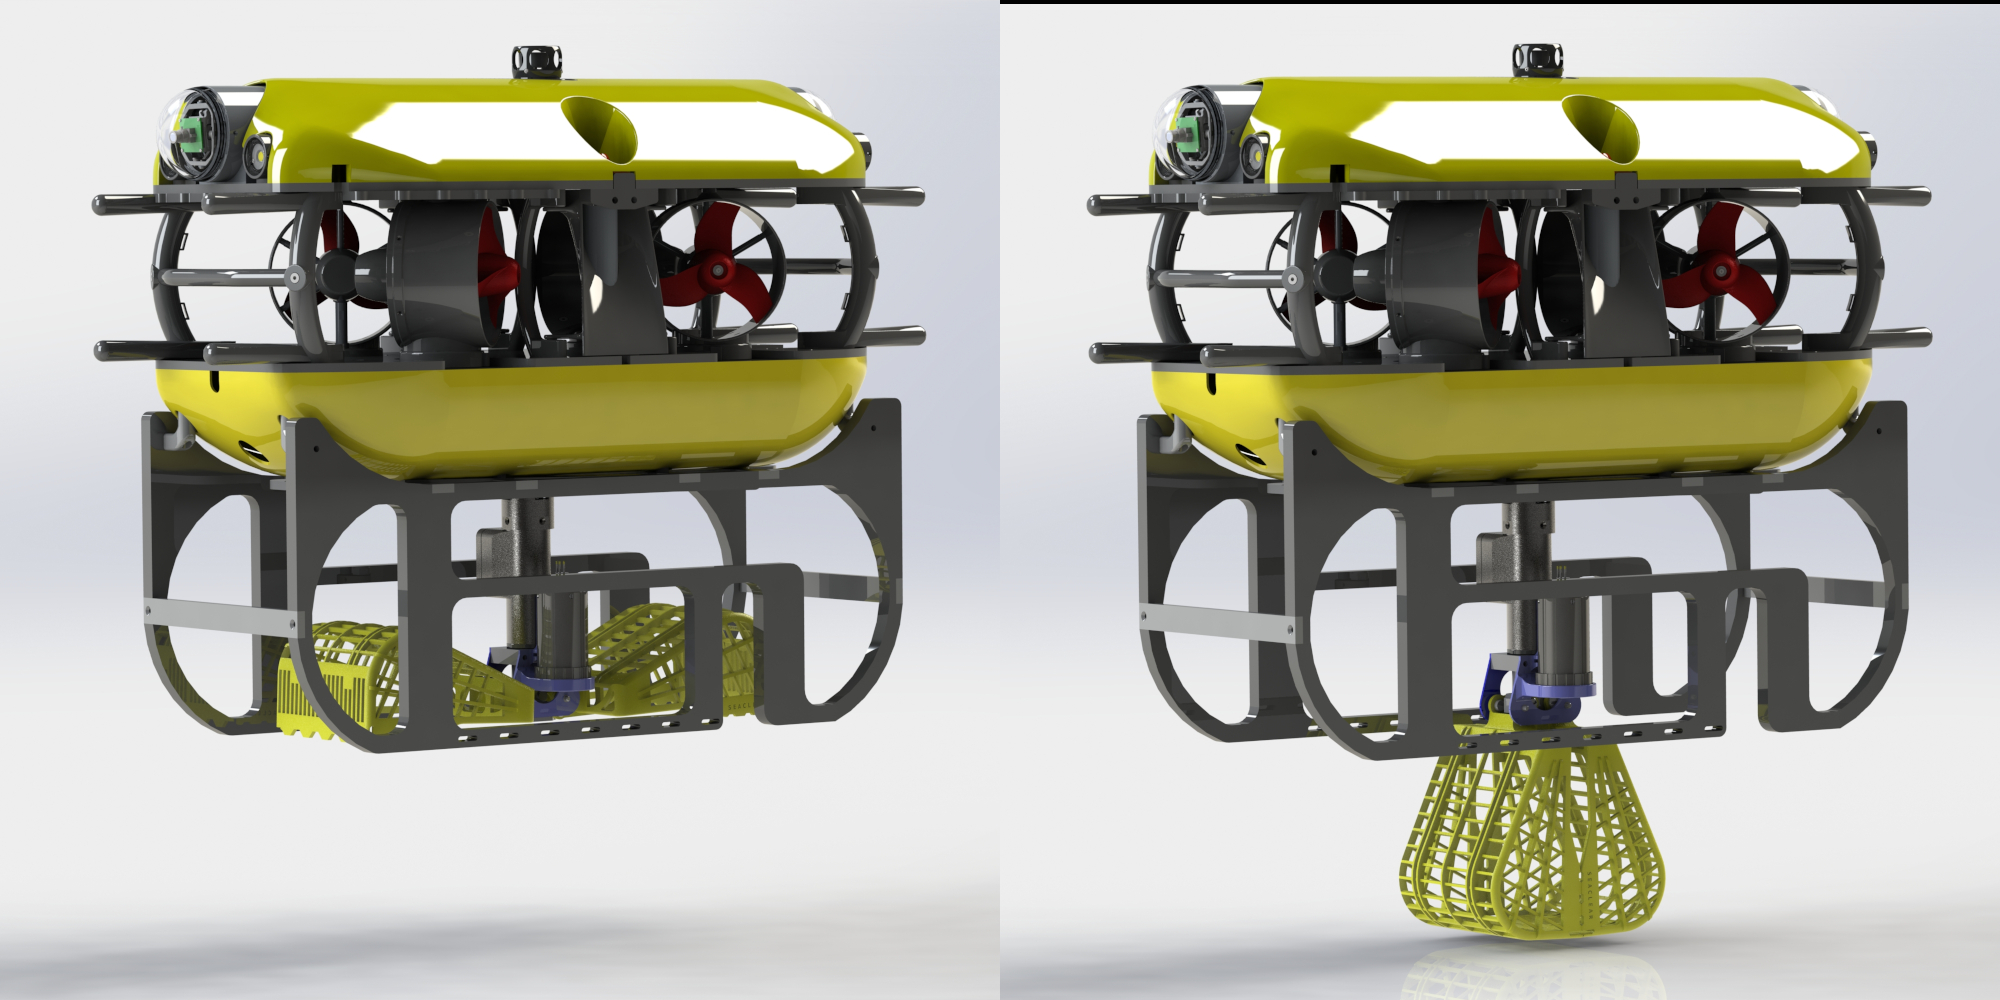 Render of the tortuga ROV with the gripper